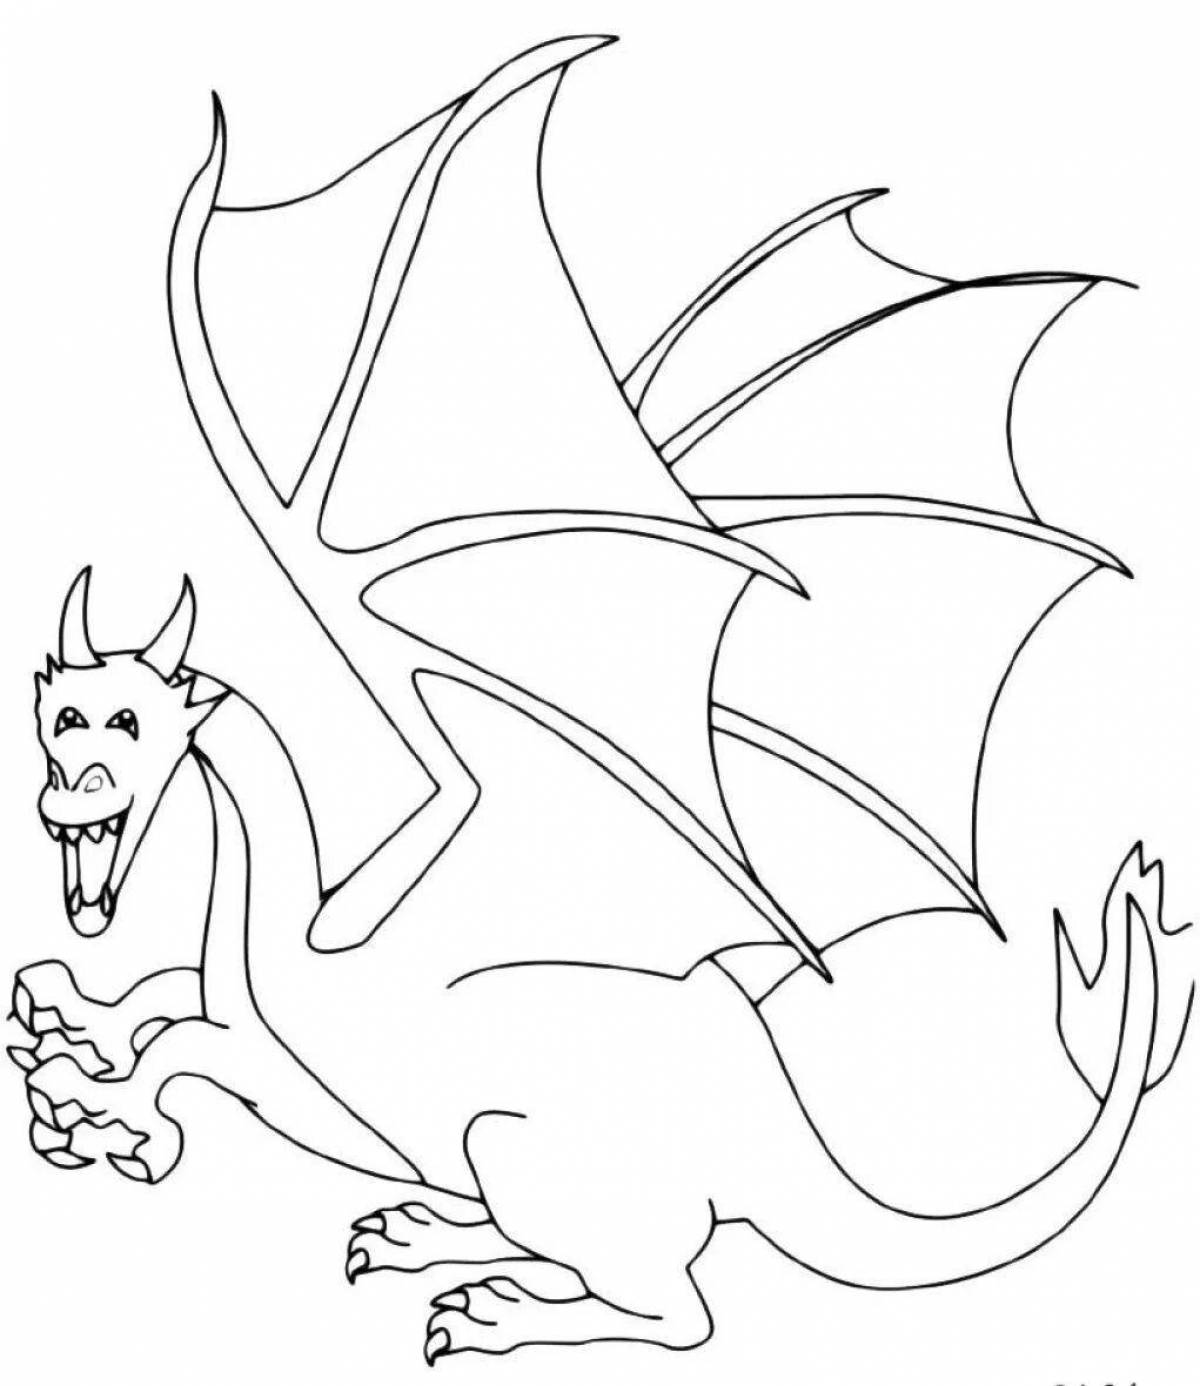 Dragon coloring book for children